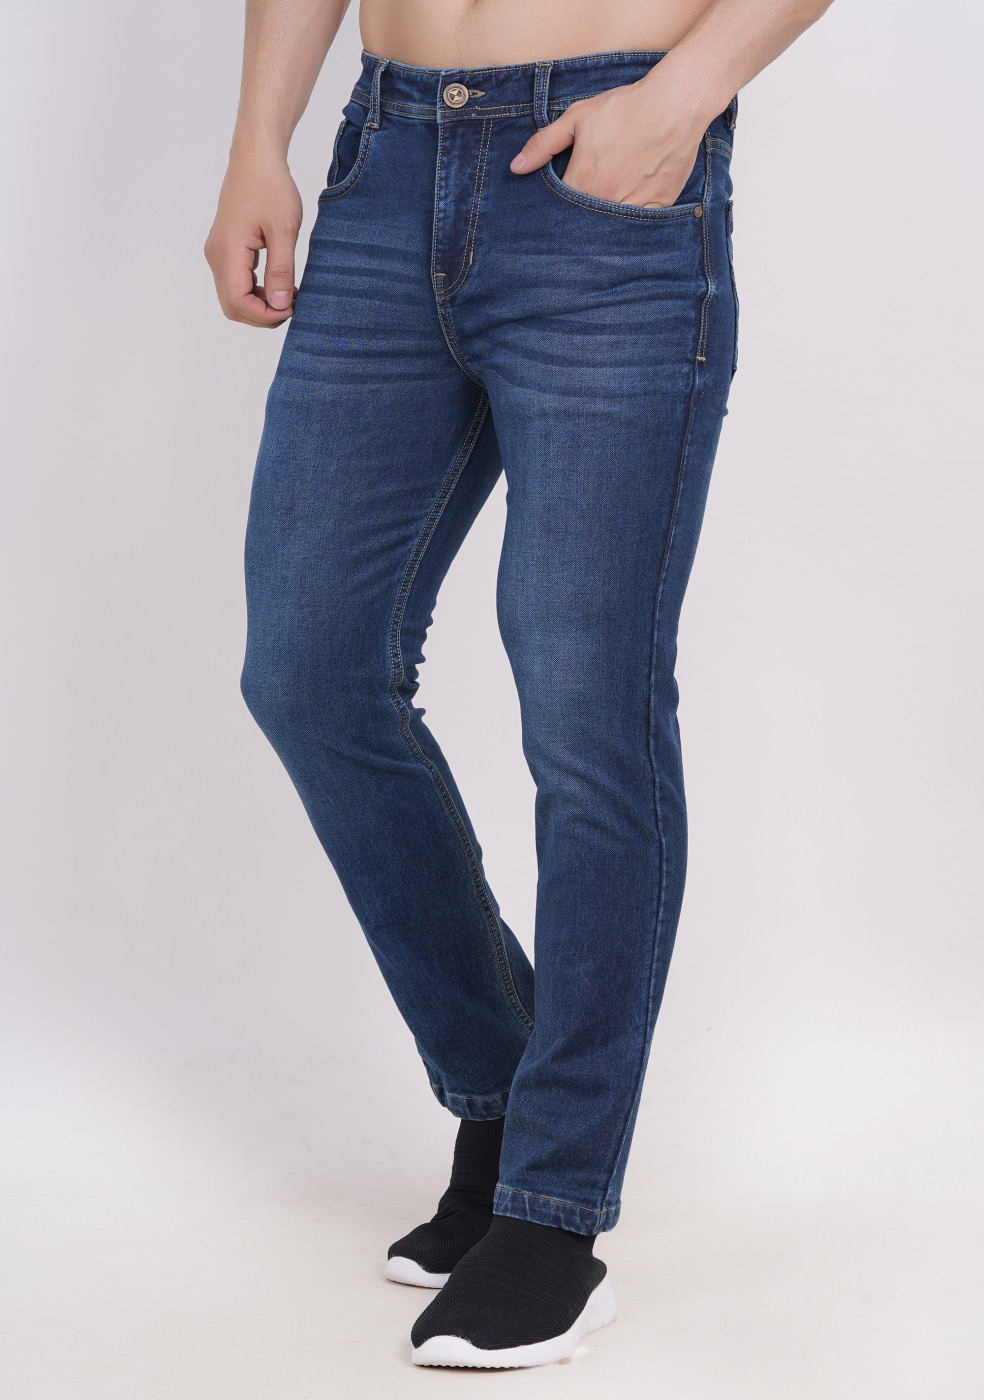 Best jeans for men in India